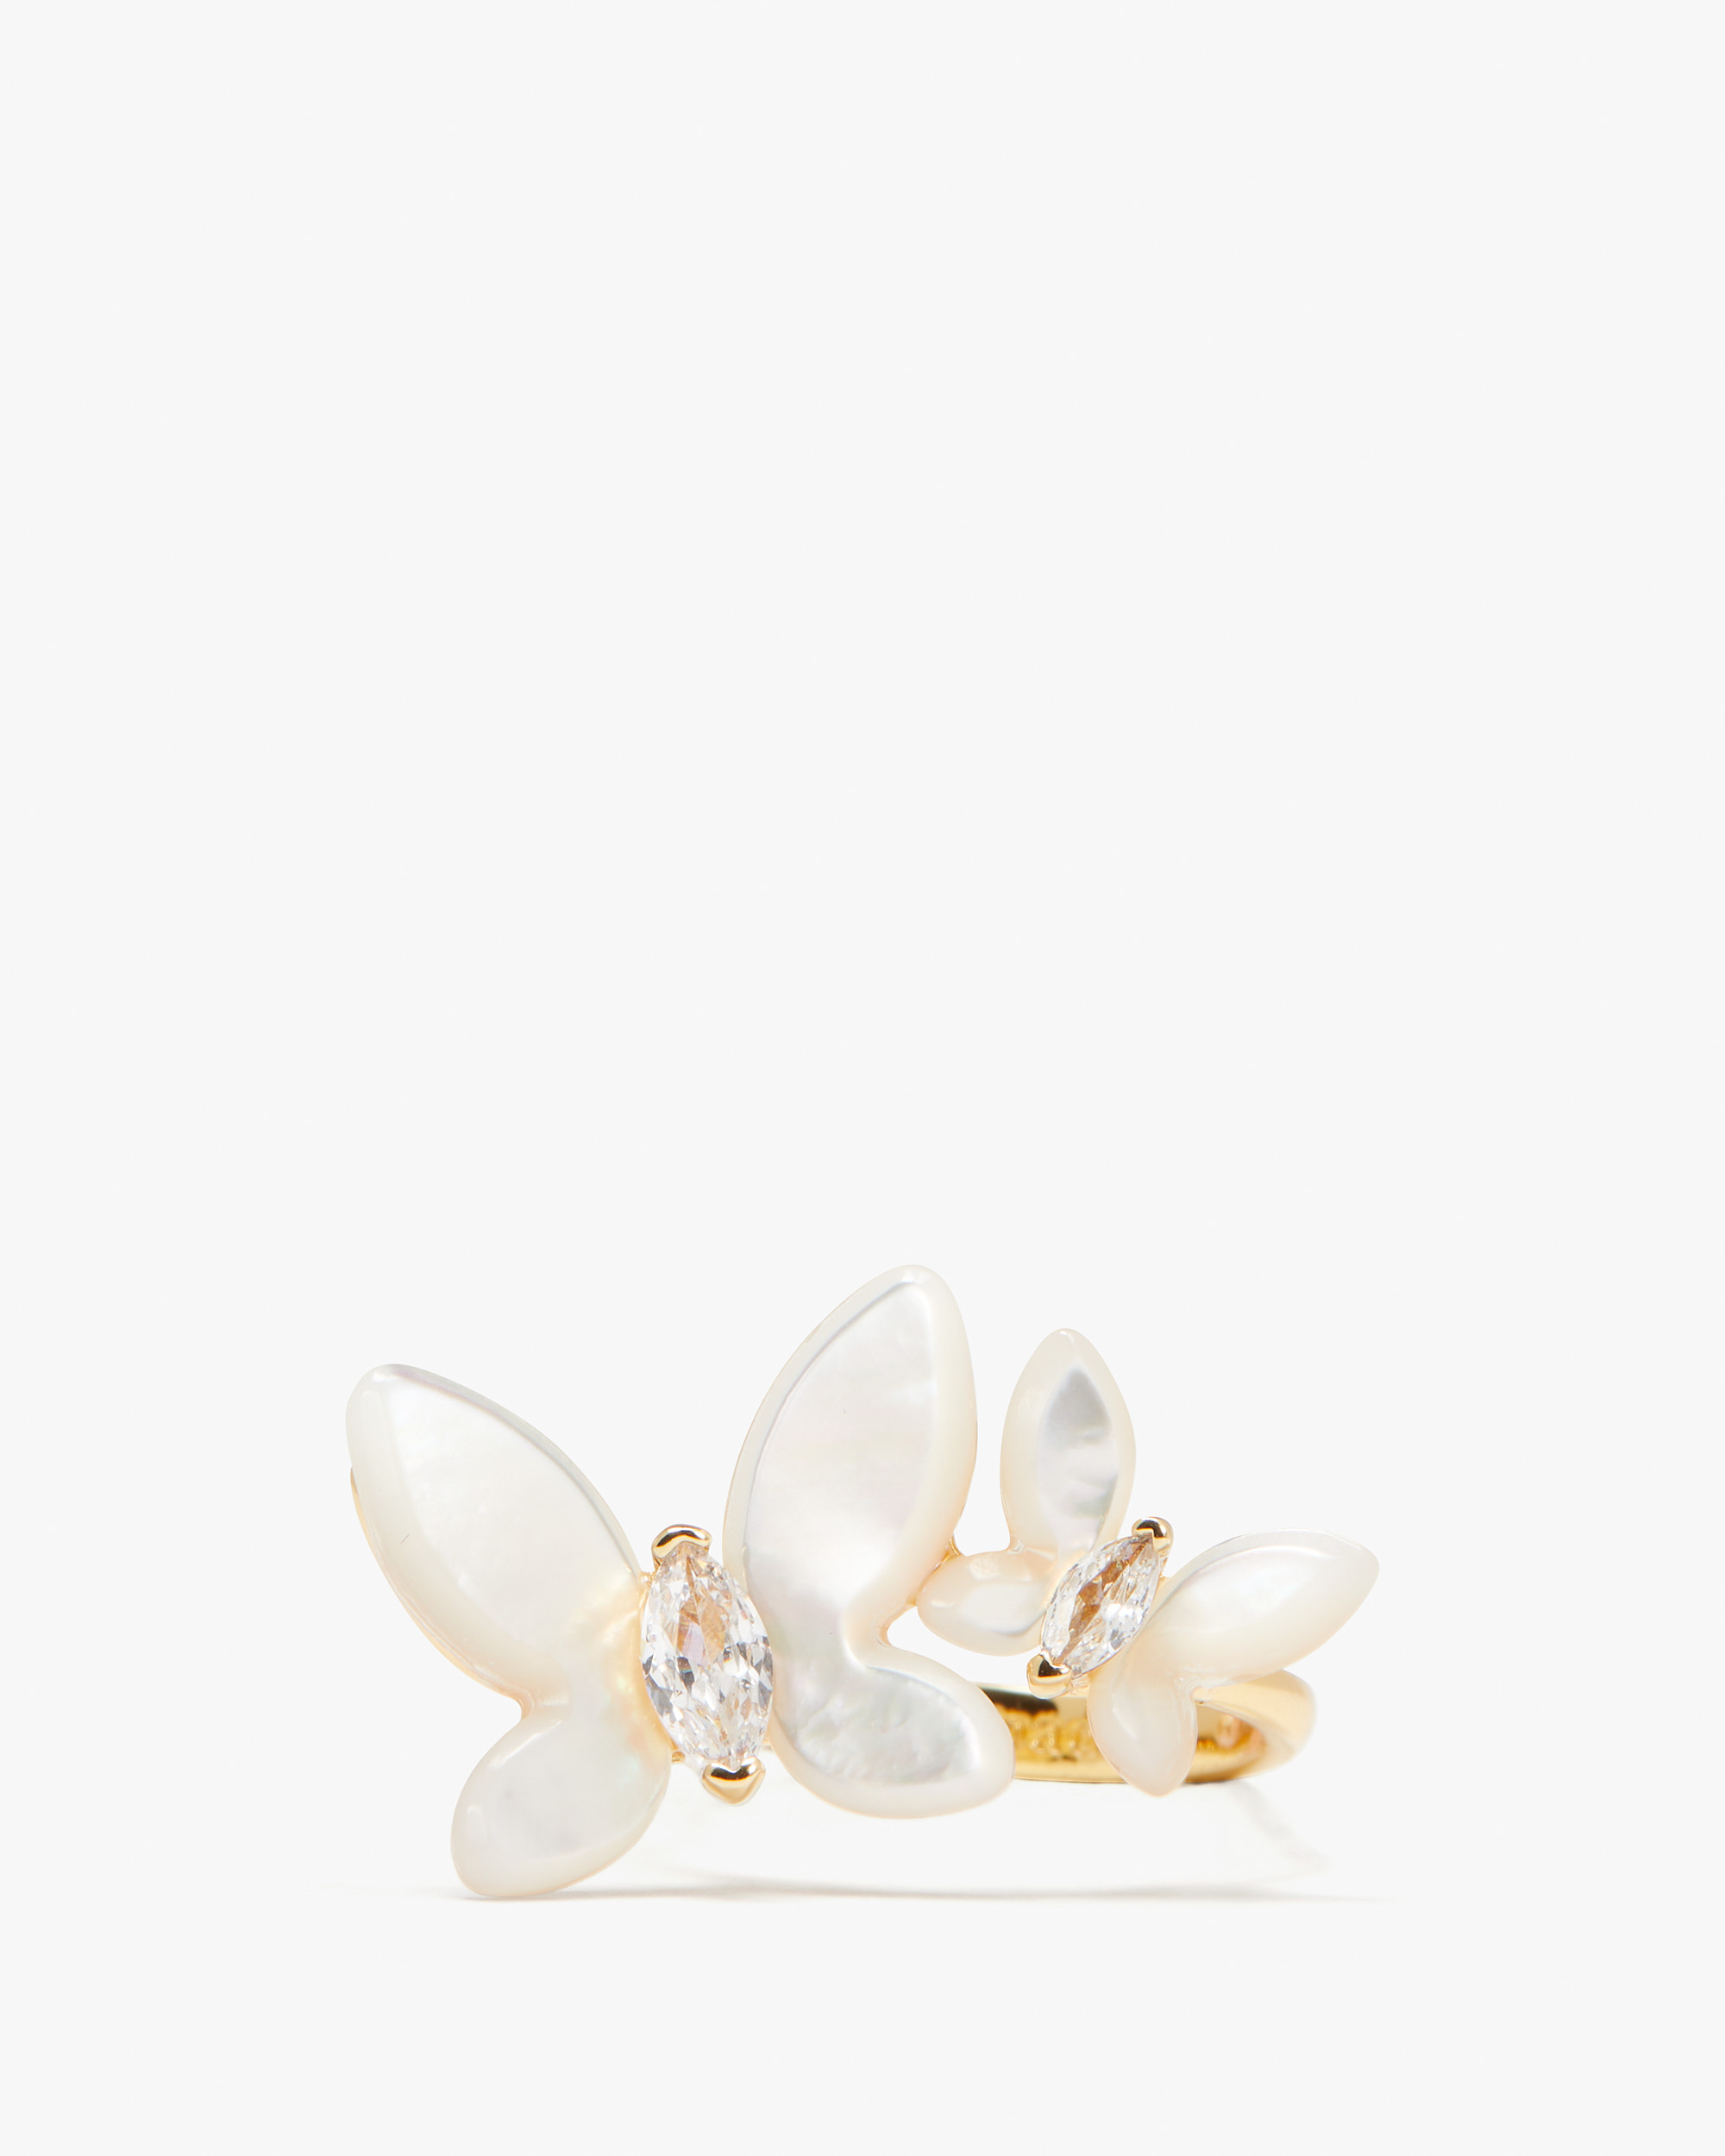 Kate Spade Social Butterfly Ring